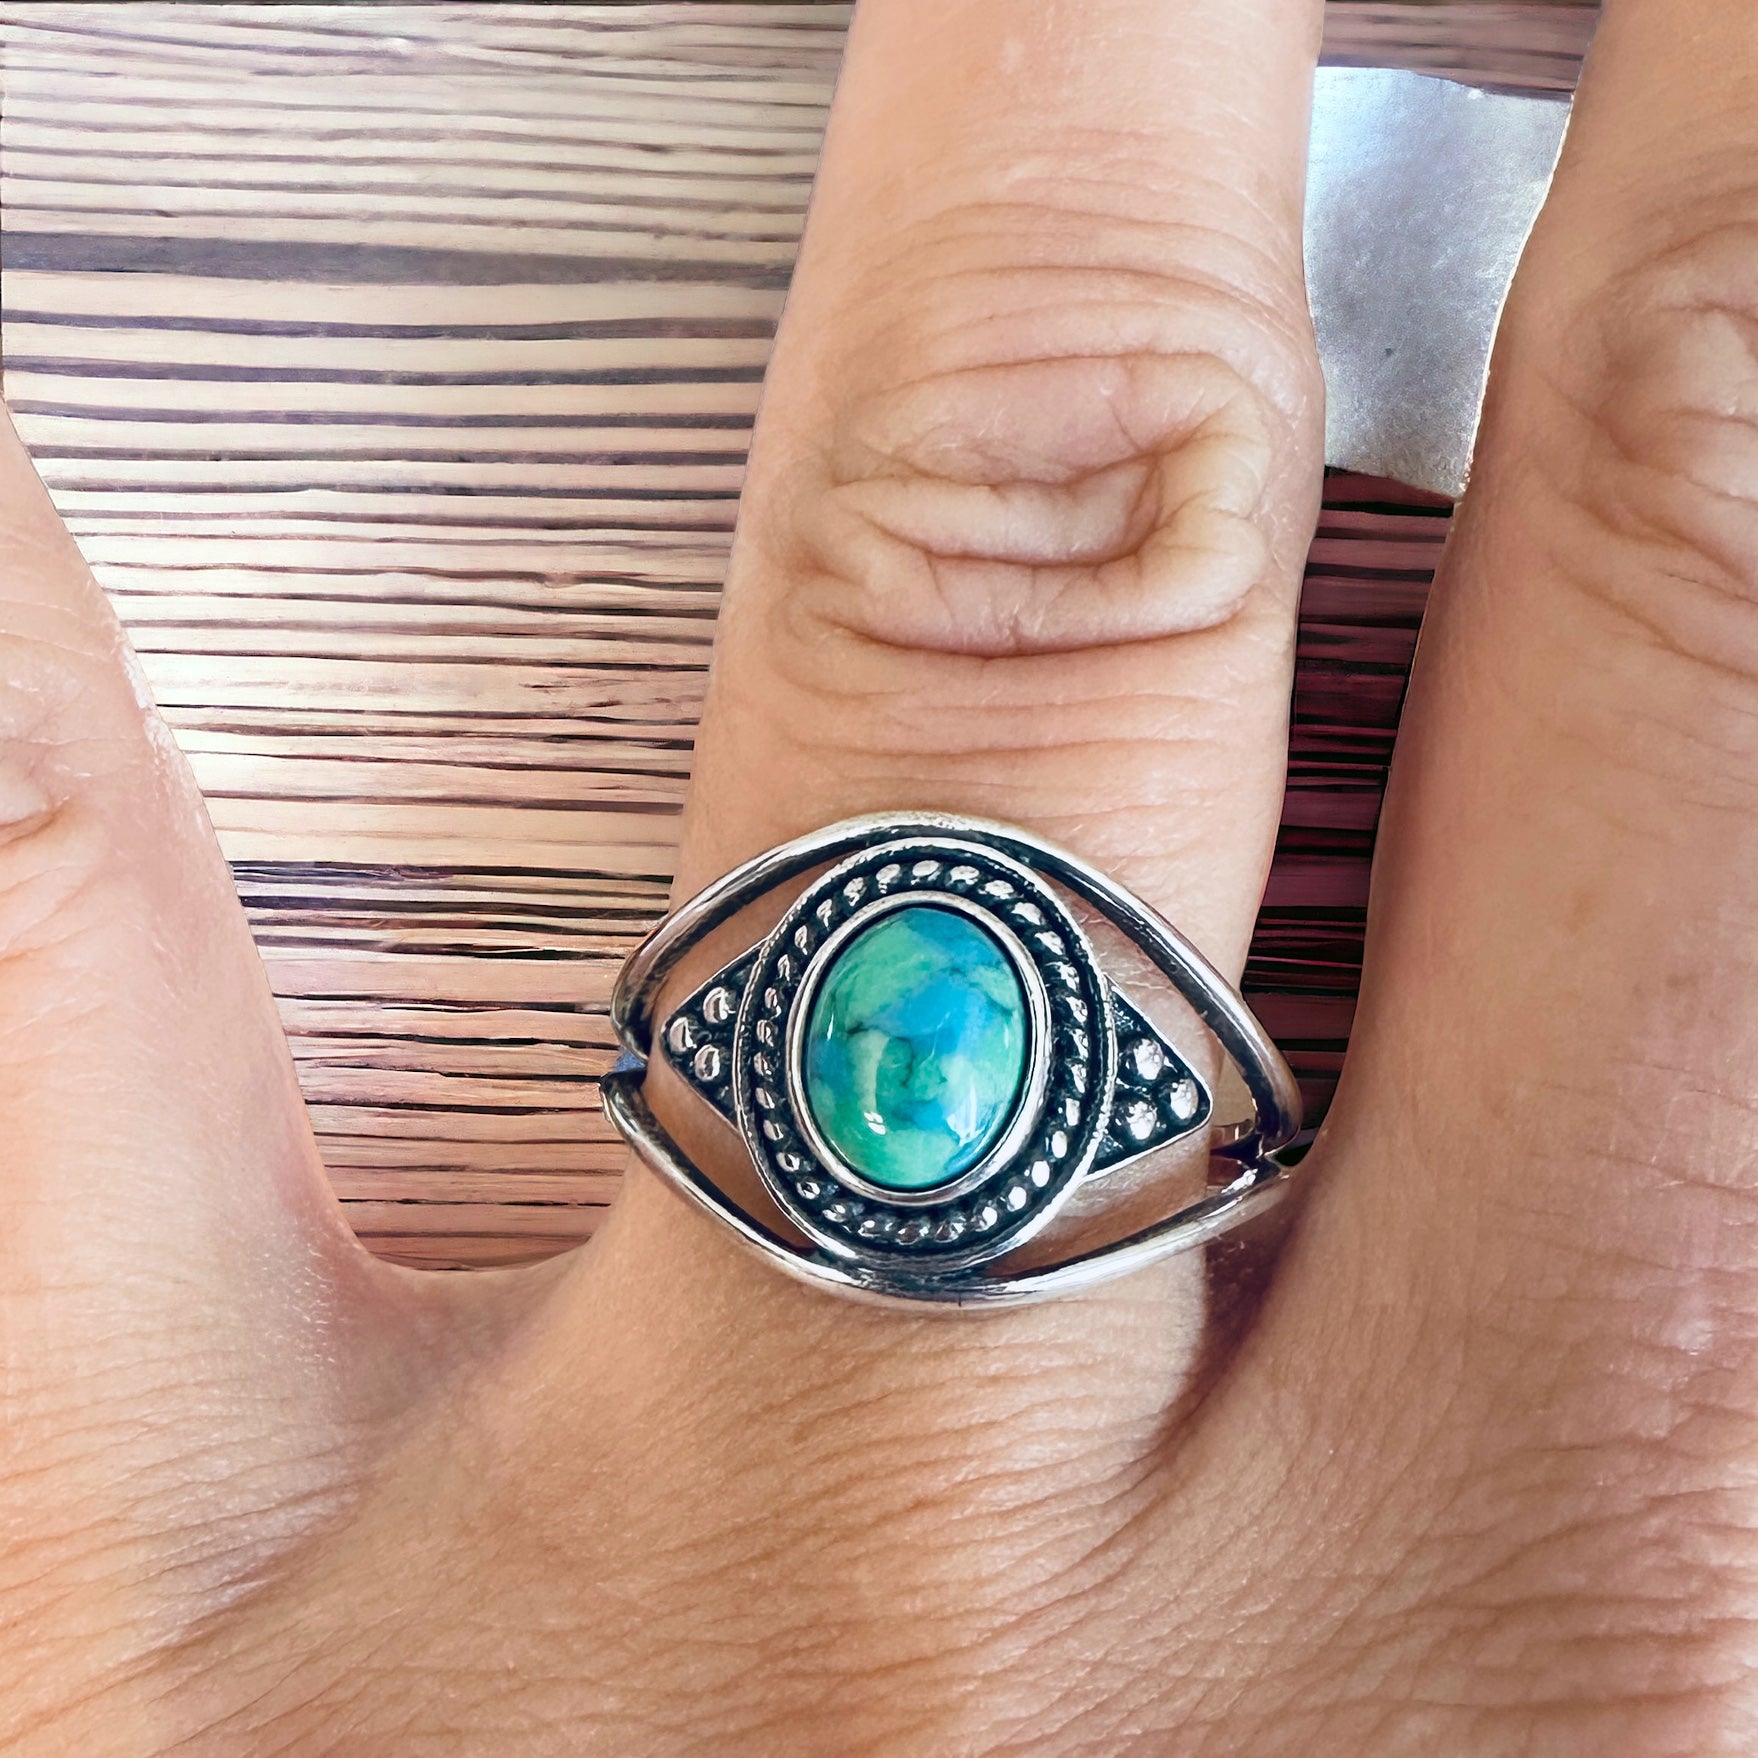 Sterling Silver Genuine Turquoise Stone Ring